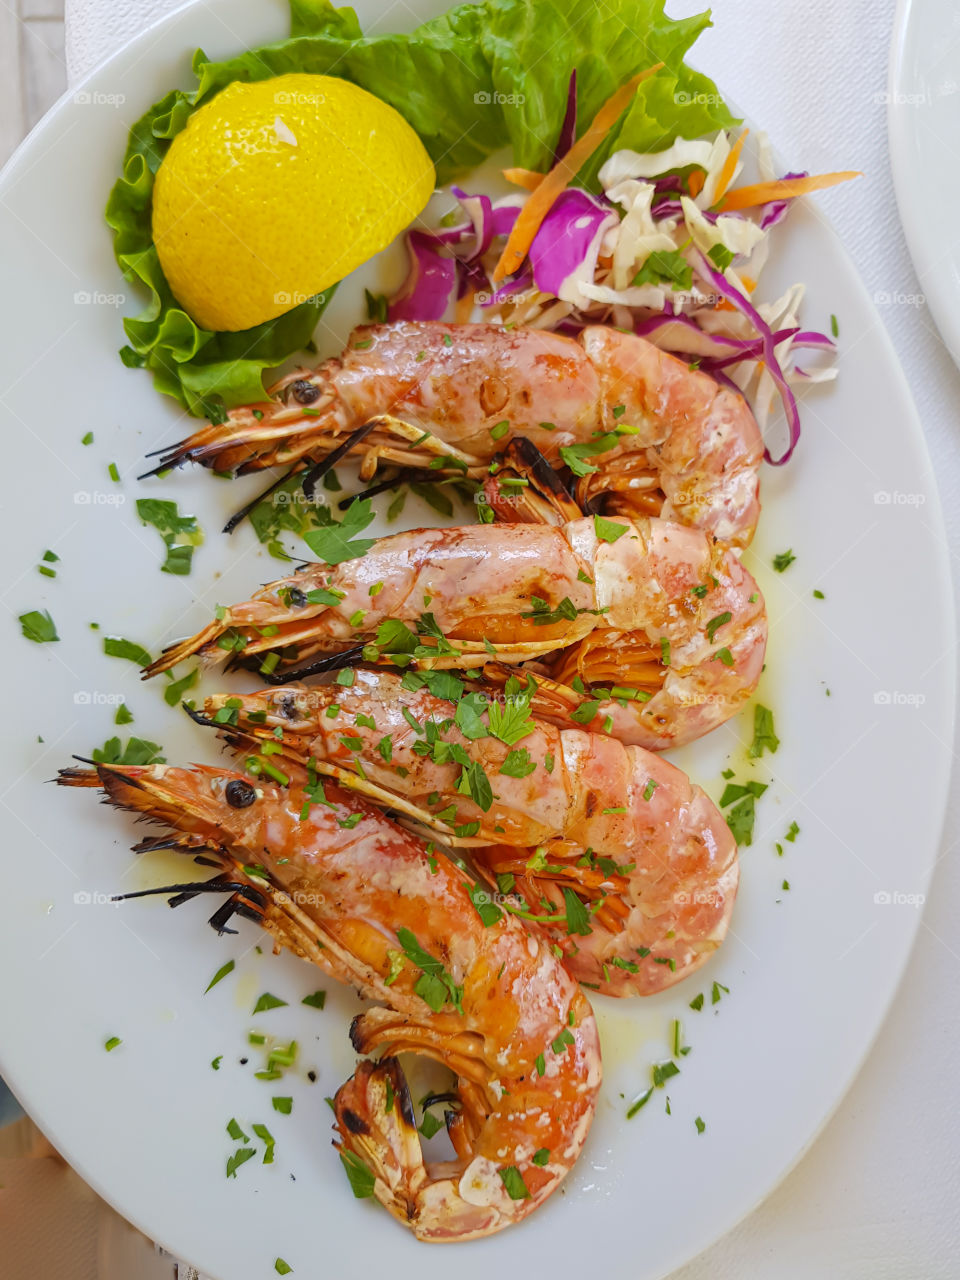 Dish of grilled shrimps with vegetables salad, lemon and parsley on white plate at the table.